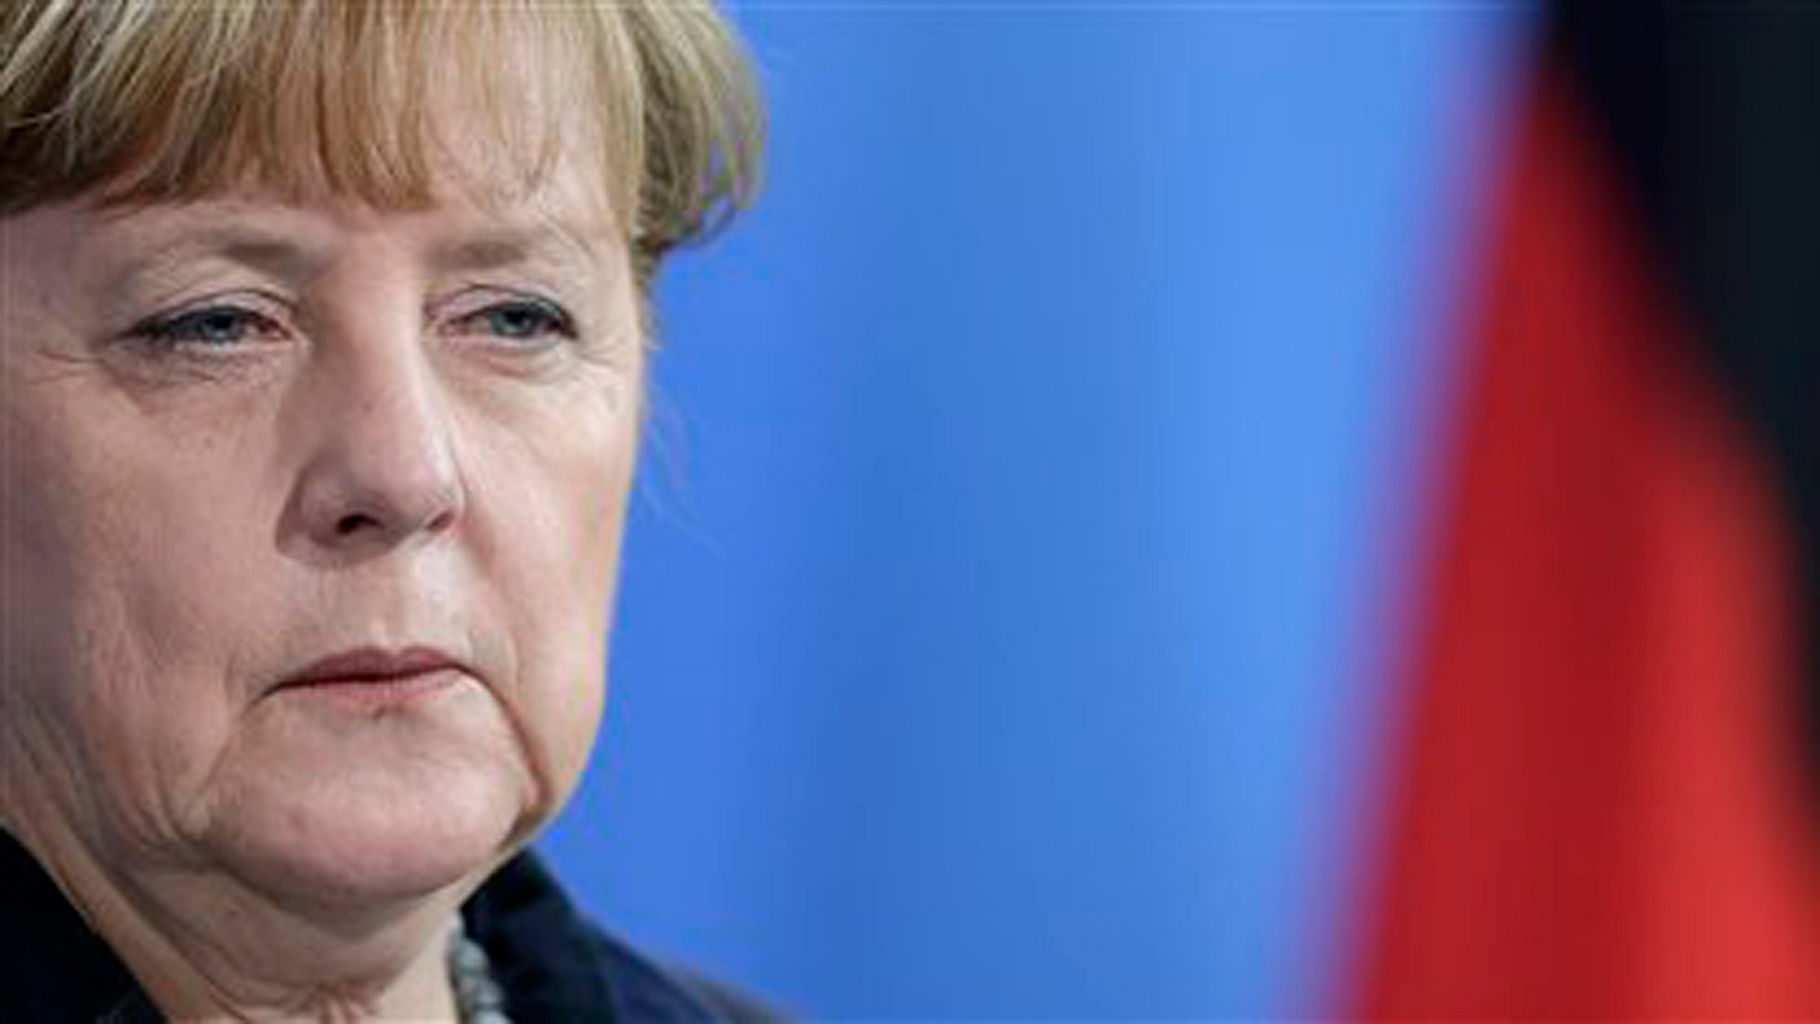 

German Chancellor Angela Merkel has proposed changes to make it easier to deport asylum seekers who commit crimes. (Photo: AP)